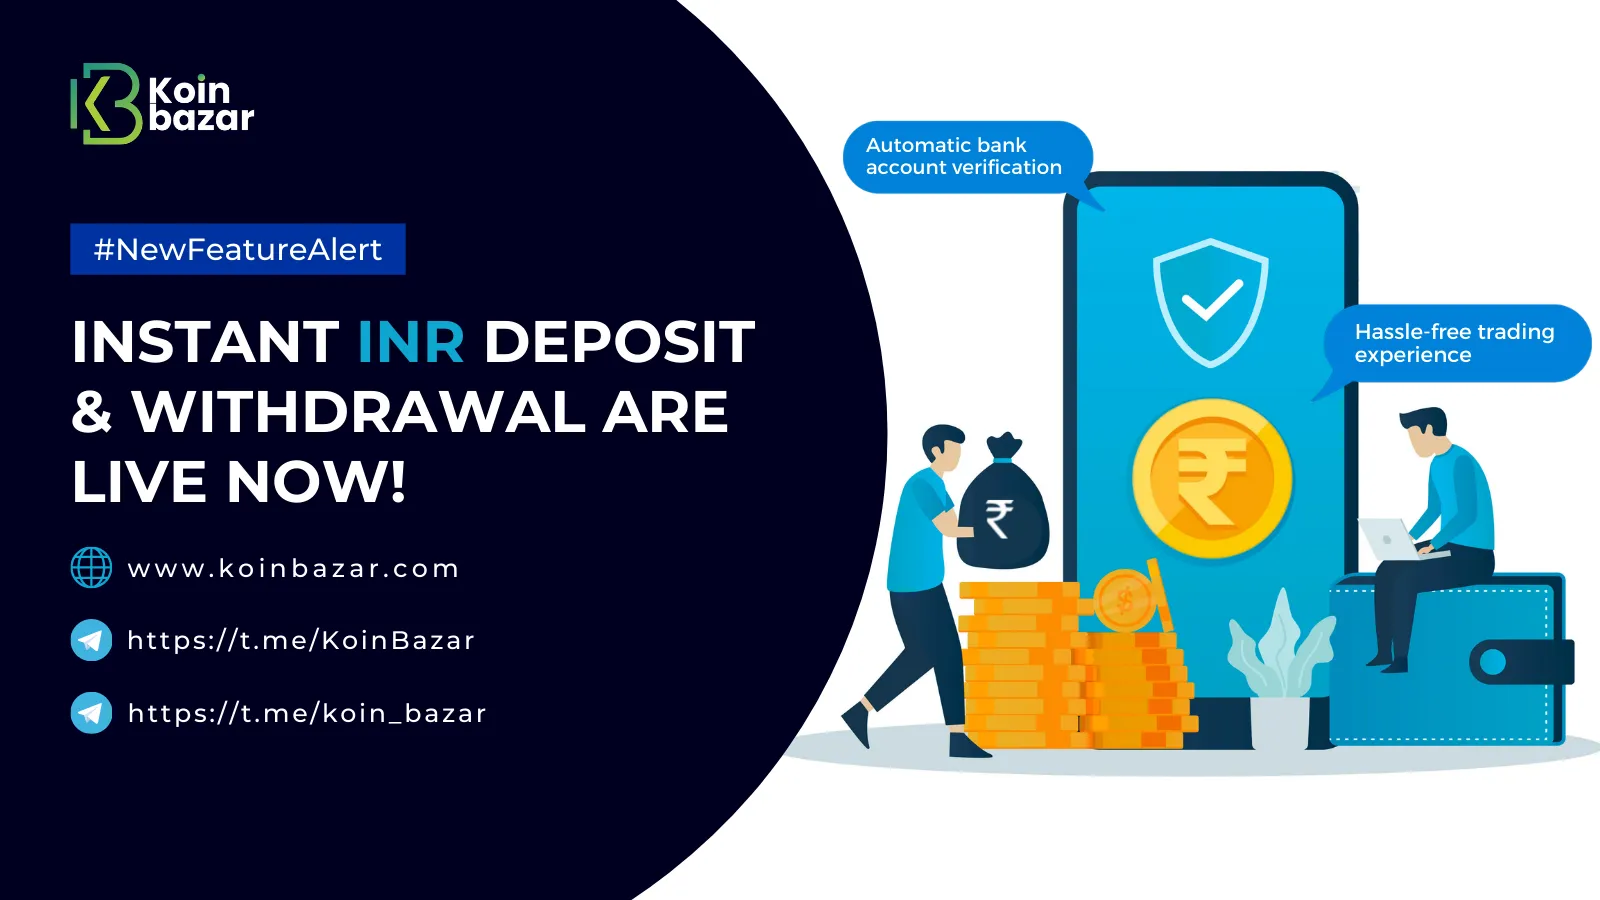 Koinbazar Launches Instant INR Deposit and Withdrawal Features